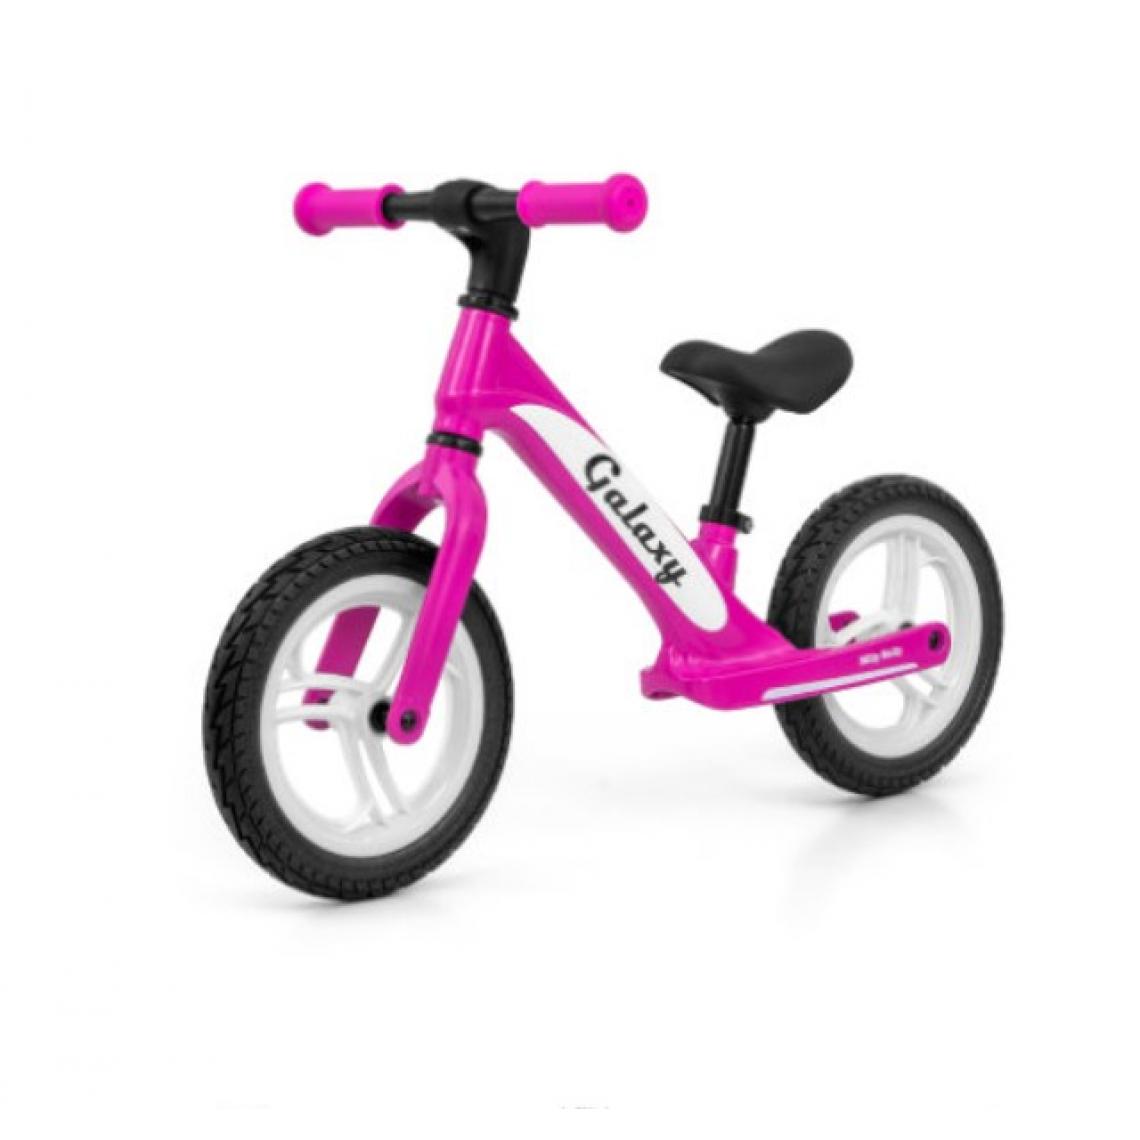 Milly Mally - Milly Mally Vélo de Marche Galaxy Rose - Tricycle